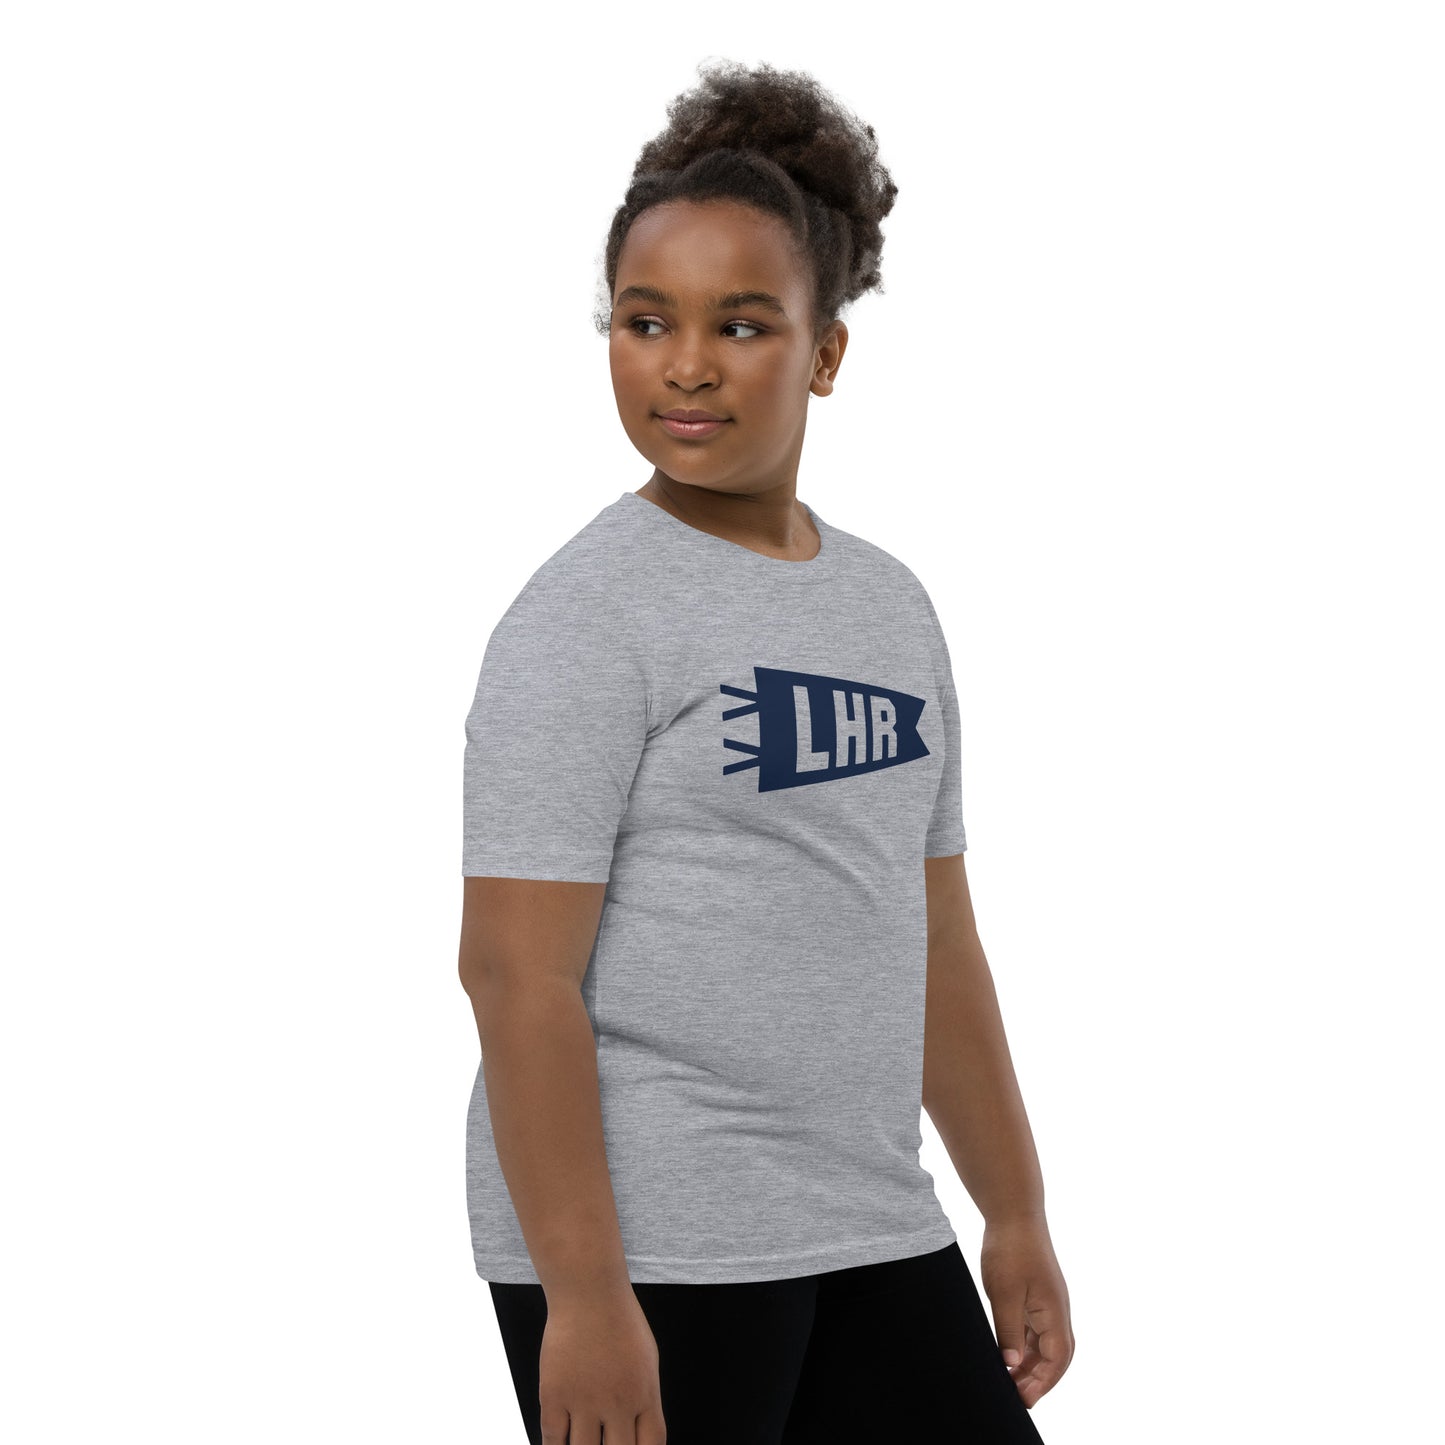 Kid's Airport Code Tee - Navy Blue Graphic • LHR London • YHM Designs - Image 03